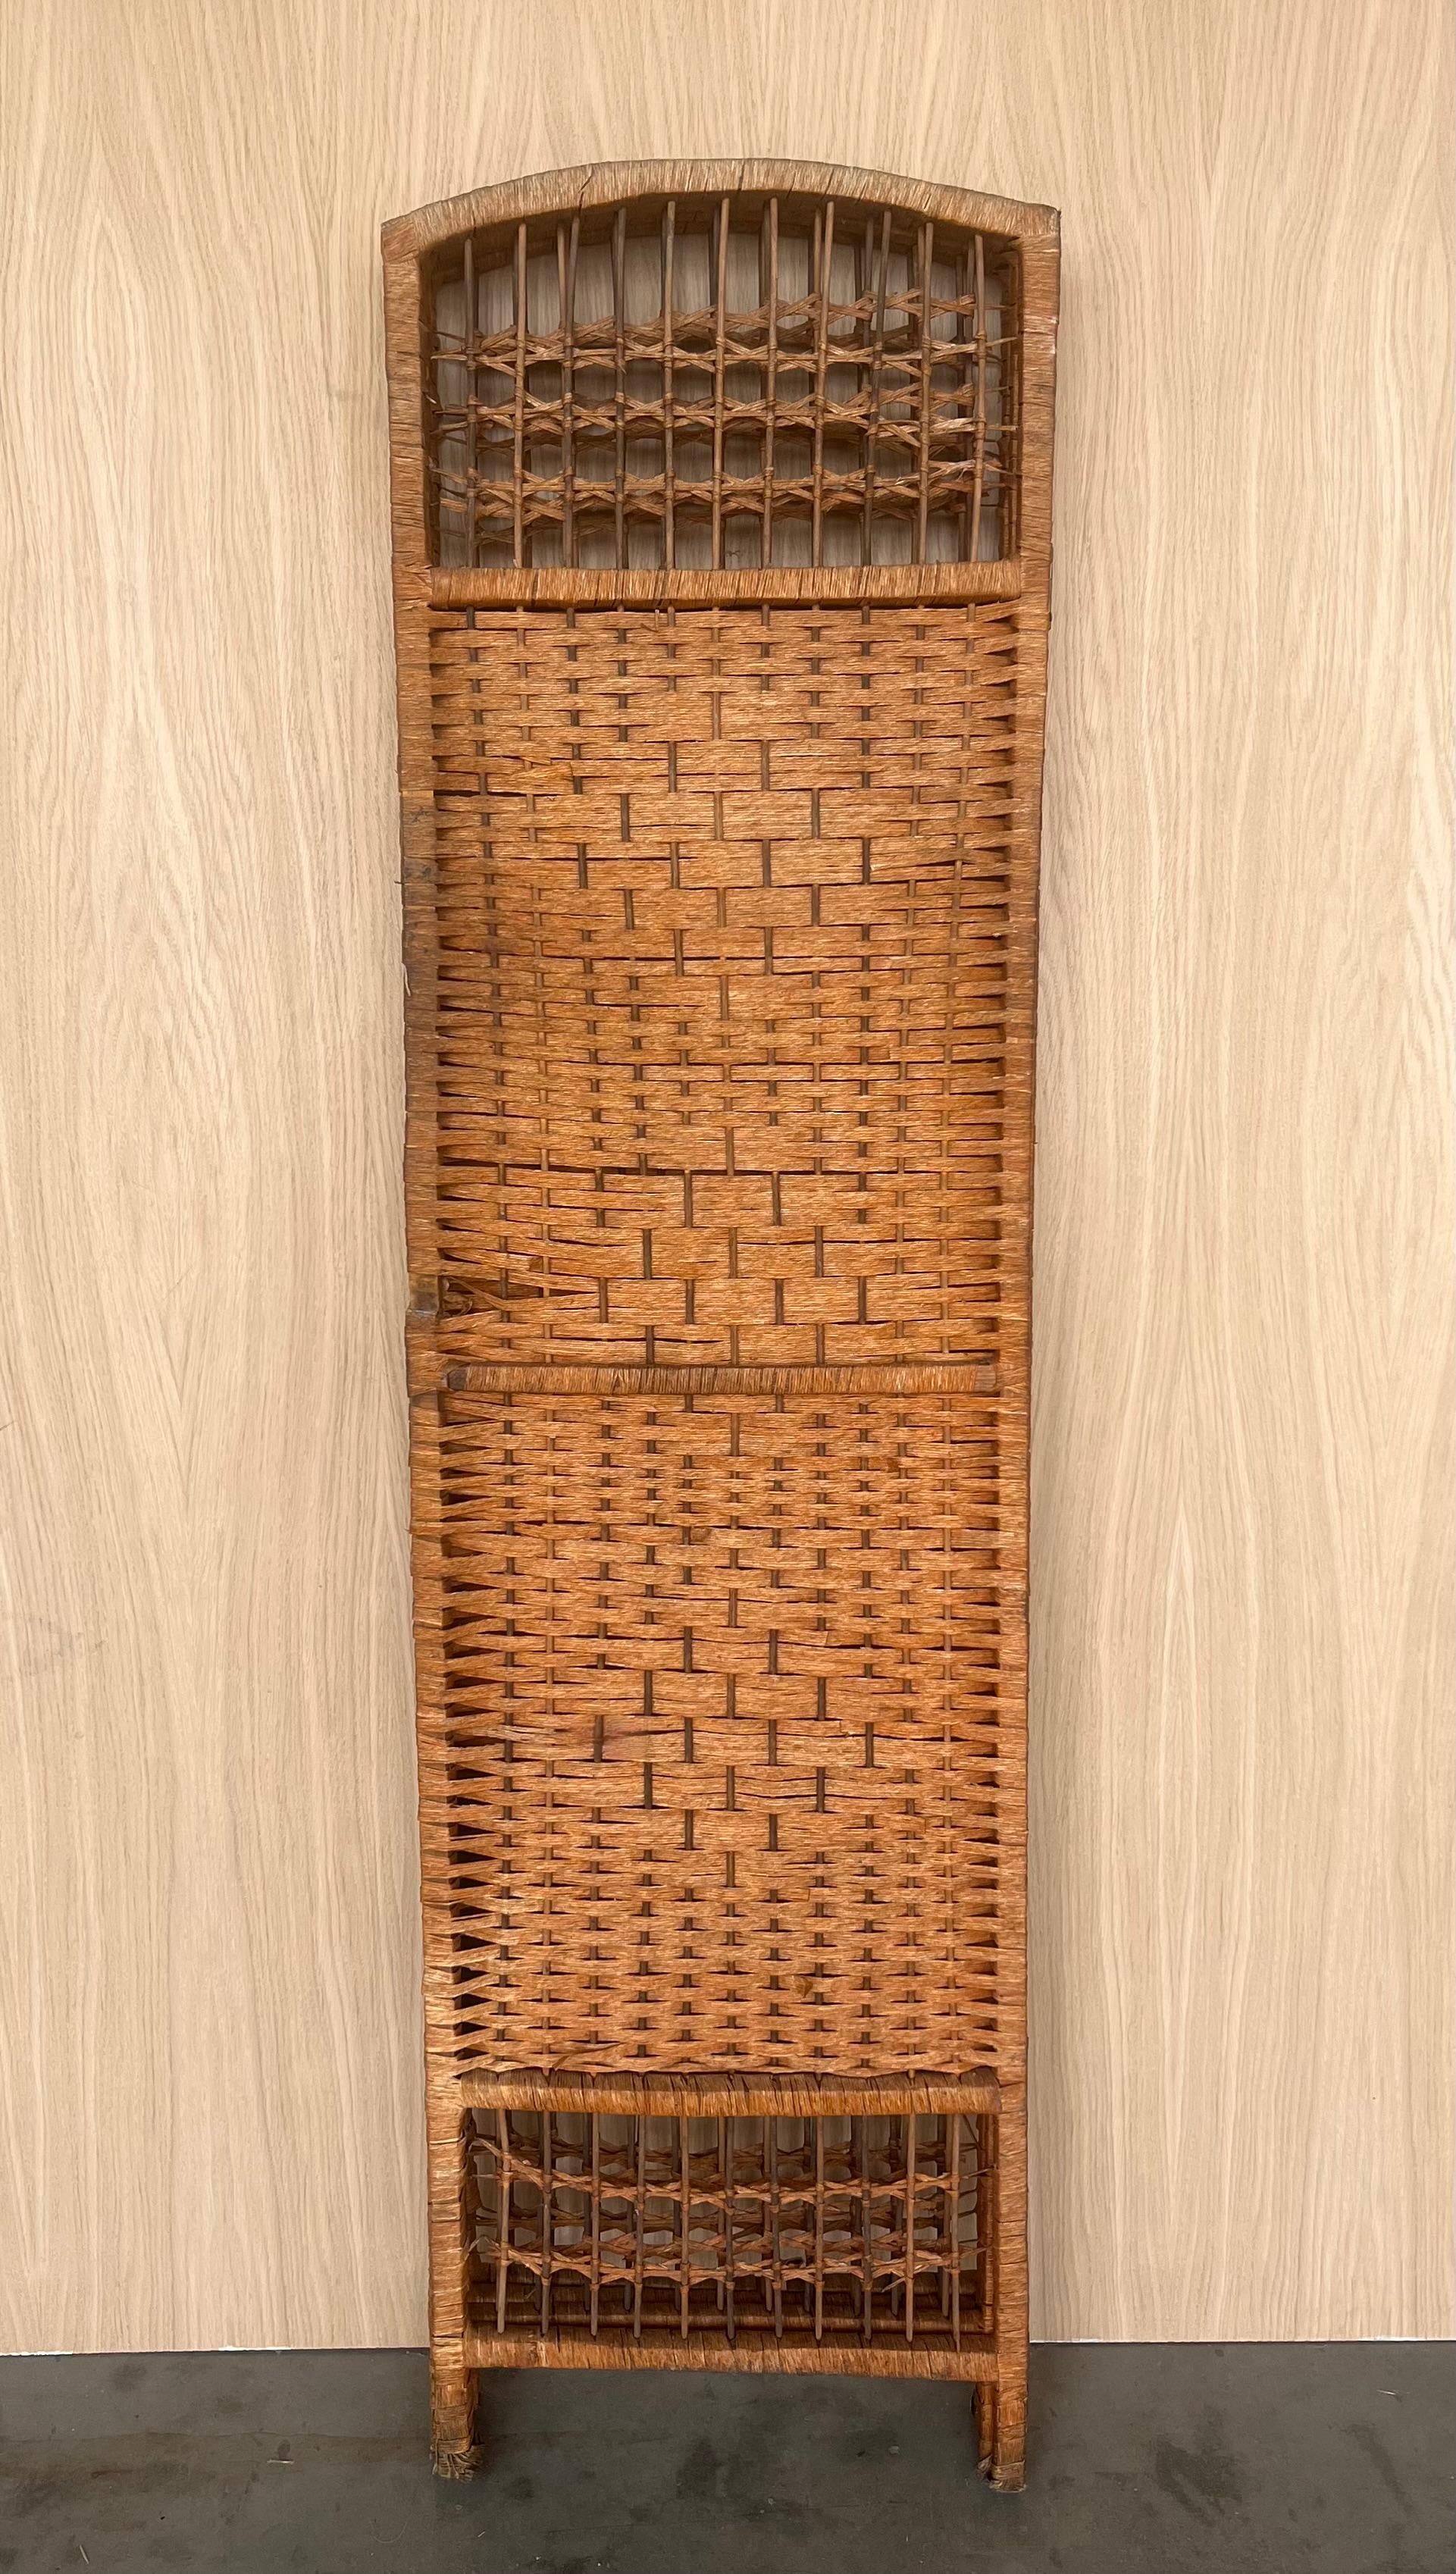 This Mid-Century-Modern eye-catching rattan or wicker and bamboo four-panel room divider with filigree decoration was crafted in France in the 1960s. This rattan screen combines mid-century and chinoiserie accents with a swirling design. 
The design